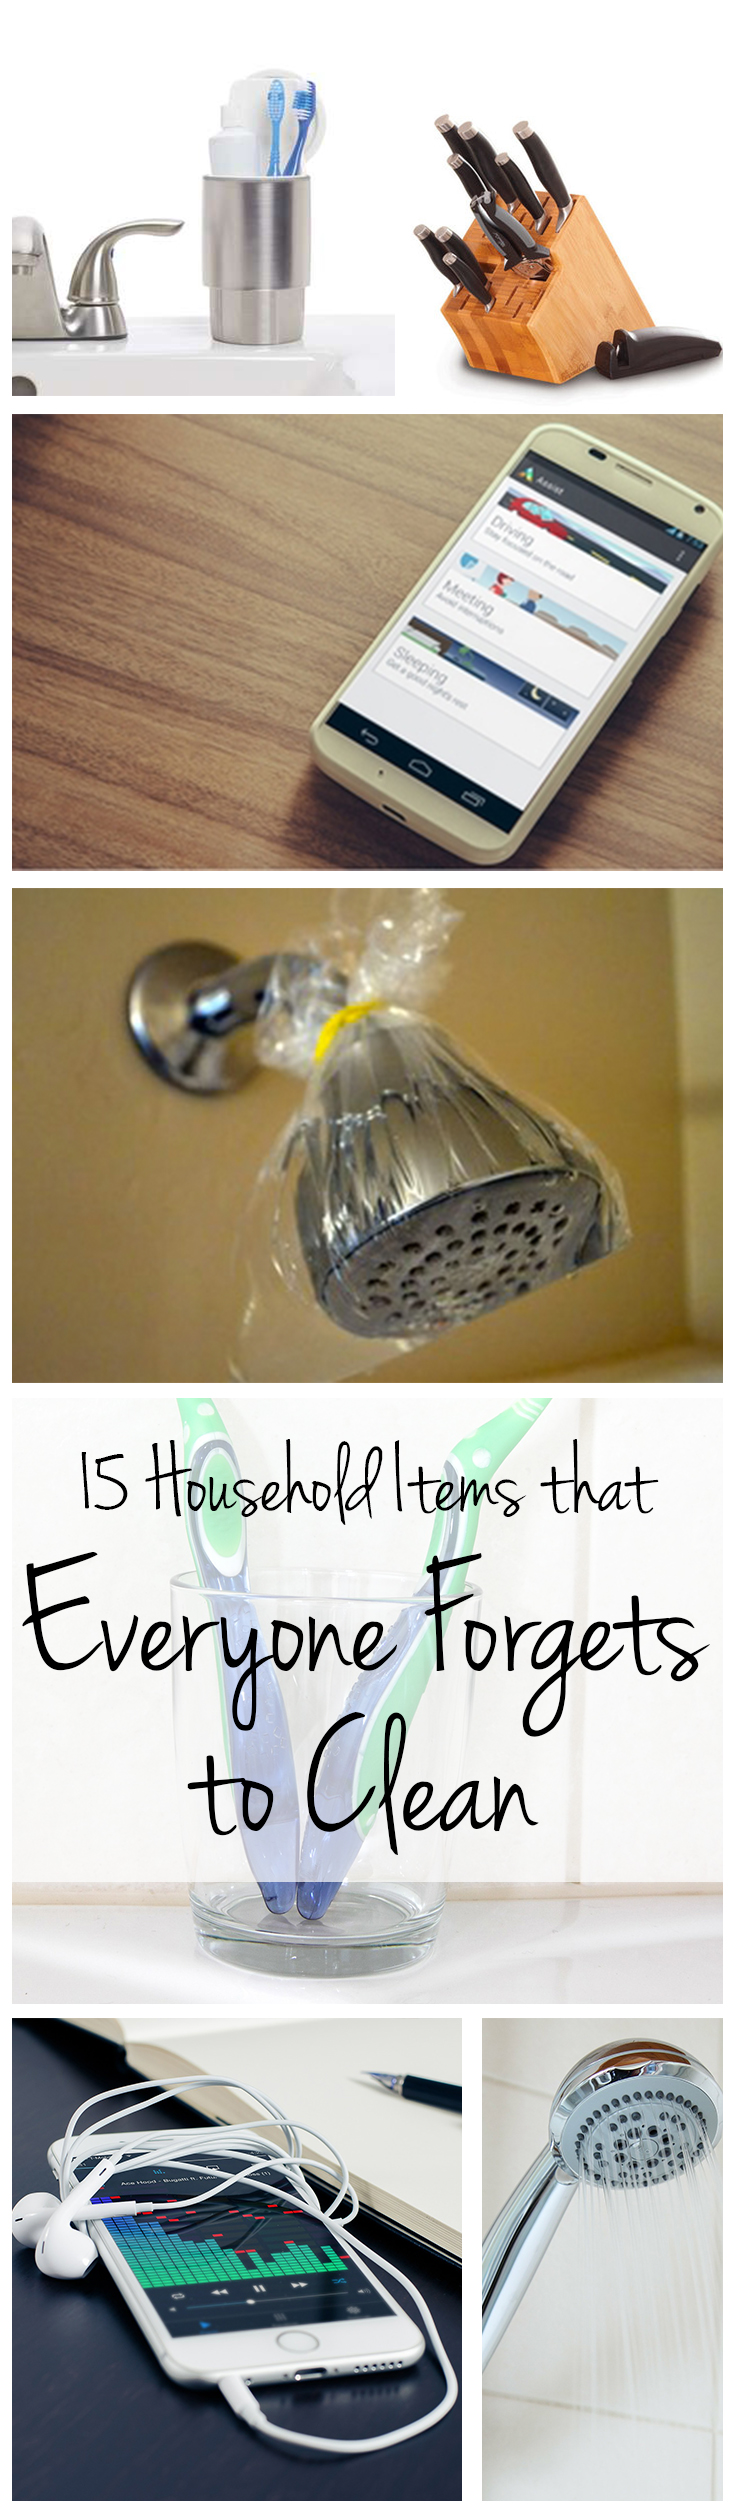 15 Household Items that Everyone Forgets to Clean 